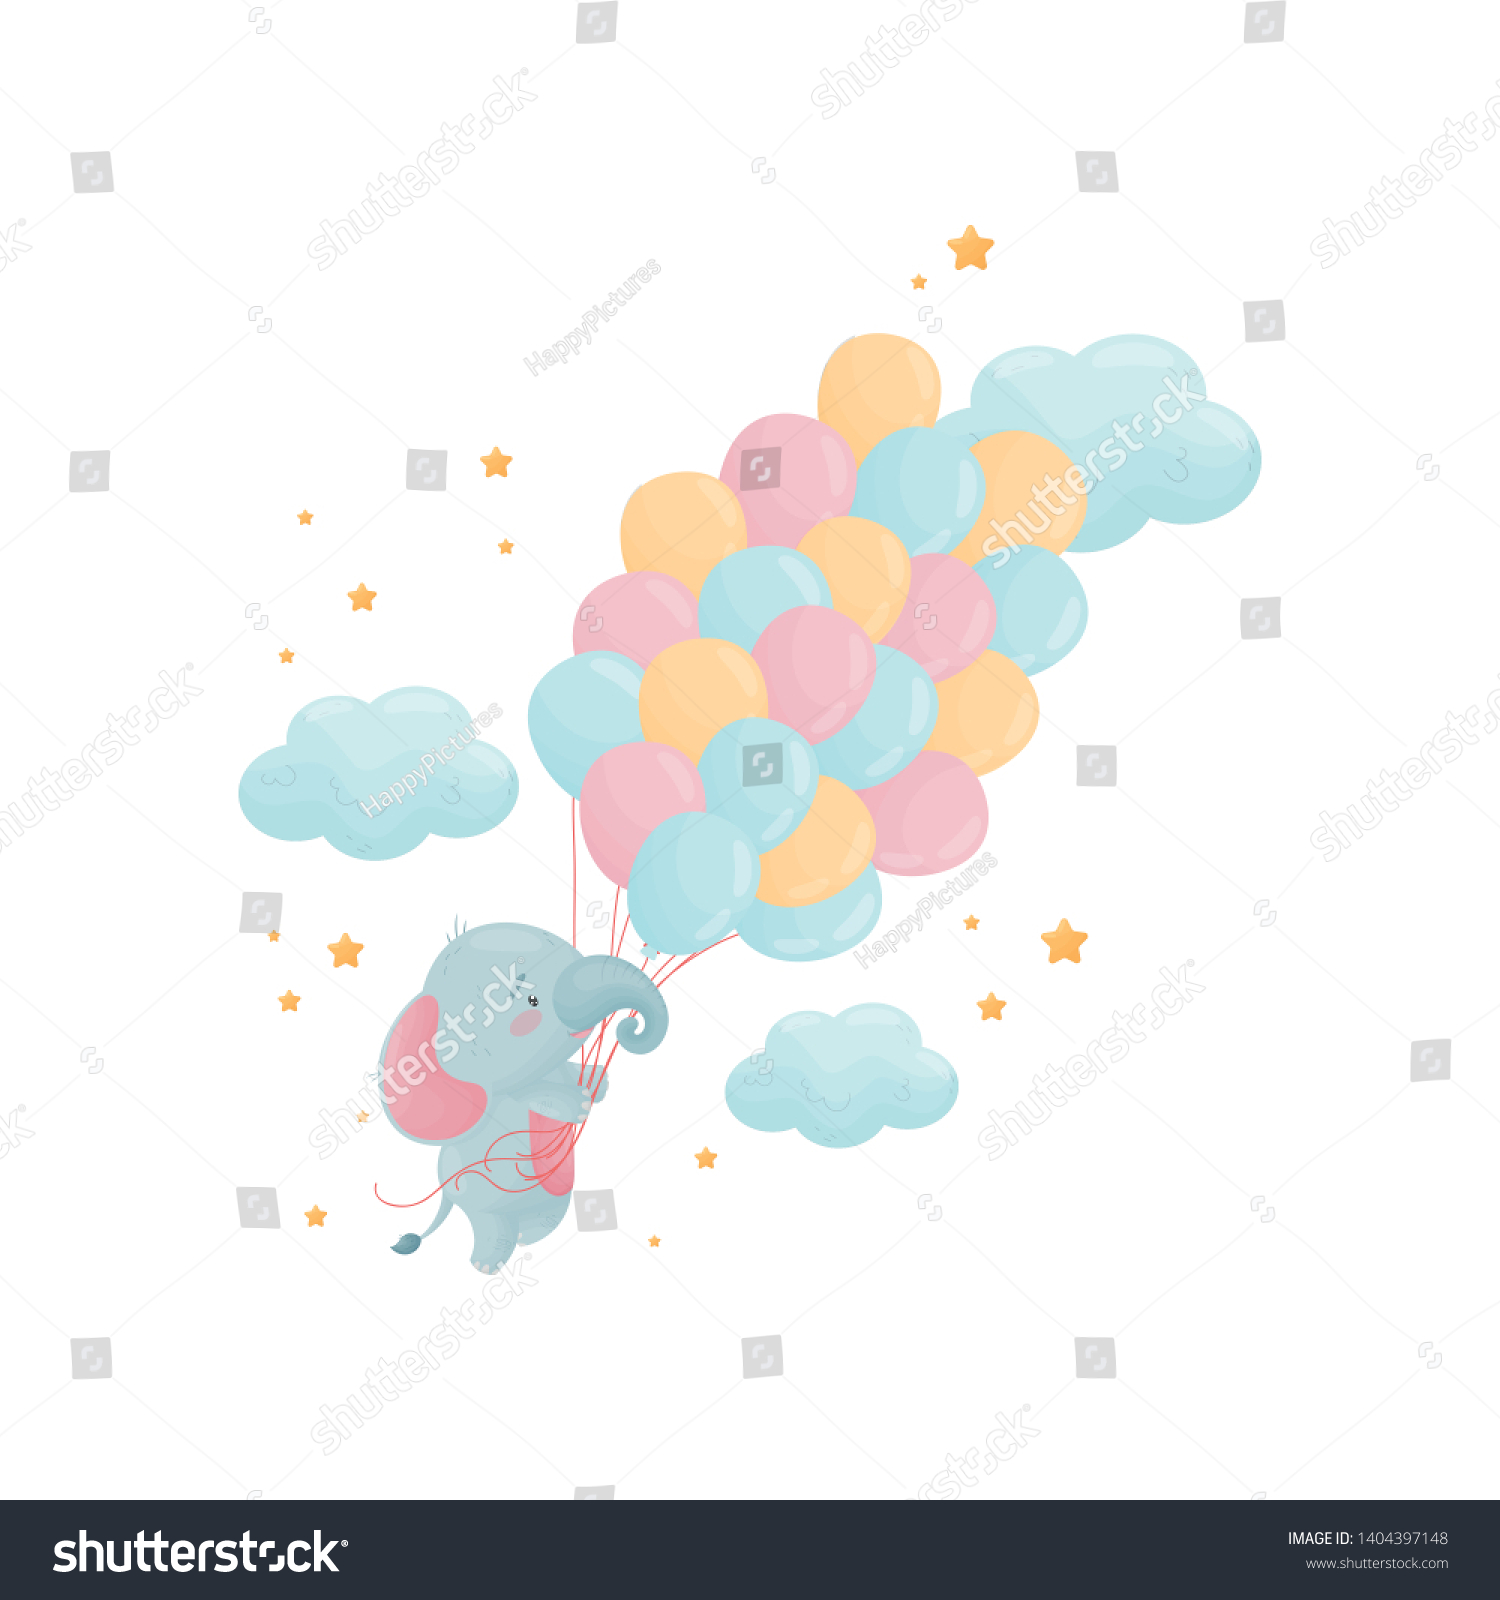 SVG of Cute little elephant is flying over a large bunch of balloons. Vector illustration on white background. svg